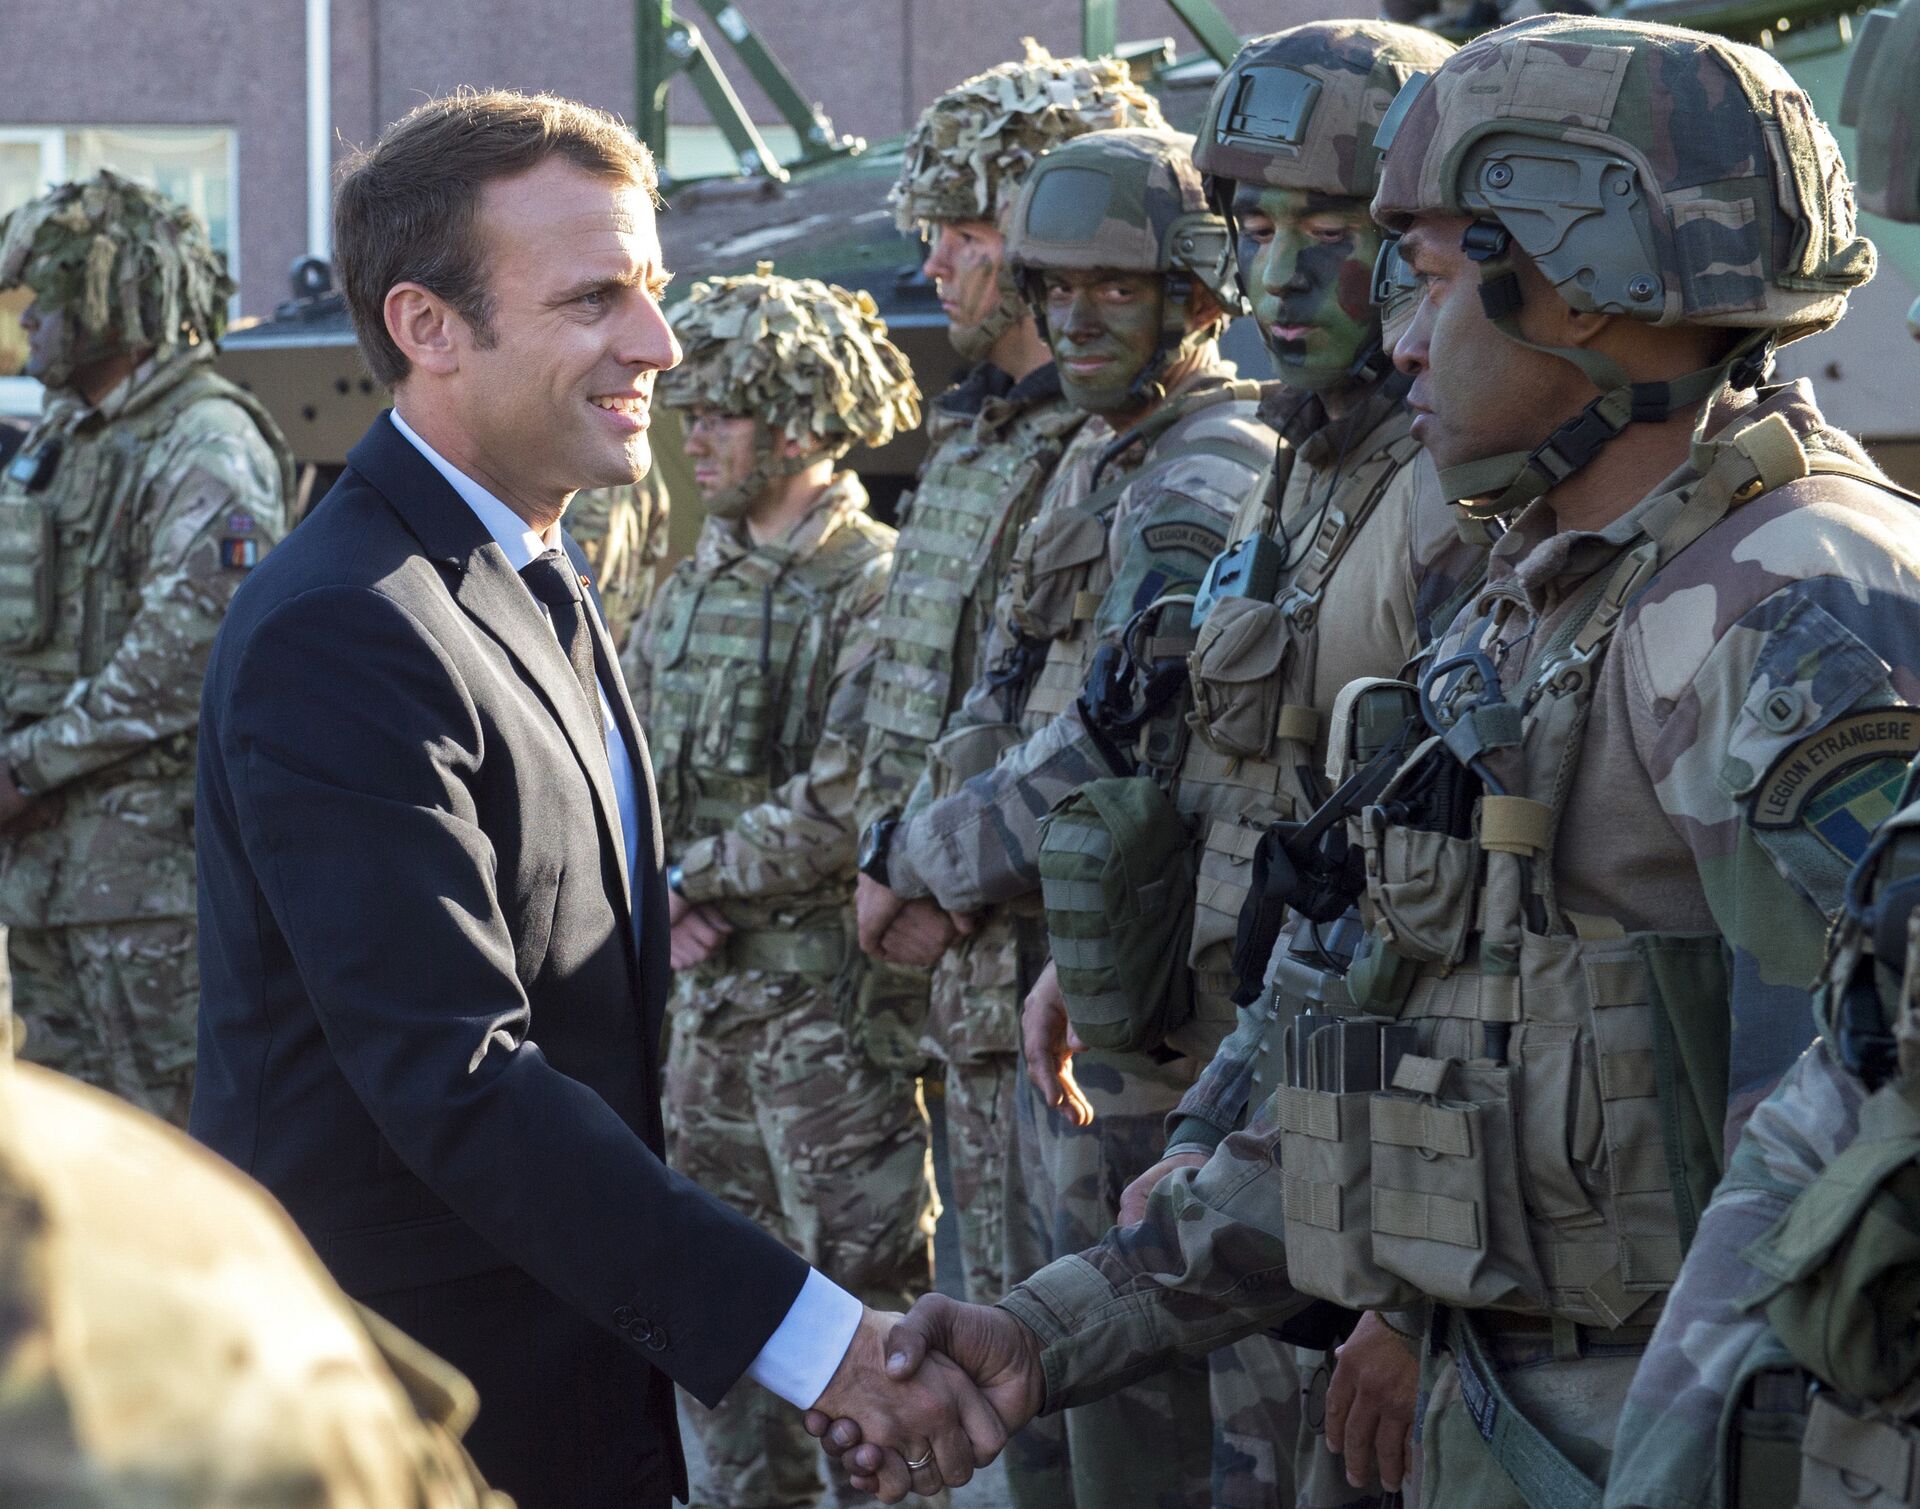 FILE - In this Friday, Sept. 29, 2017 file photo, France's President Emmanuel Macron, left, shakes hands with French soldiers of the NATO Battle Group at the Tapa military base, about 90 kilometers (56 miles) west of Tallinn, Estonia - Sputnik International, 1920, 08.12.2021